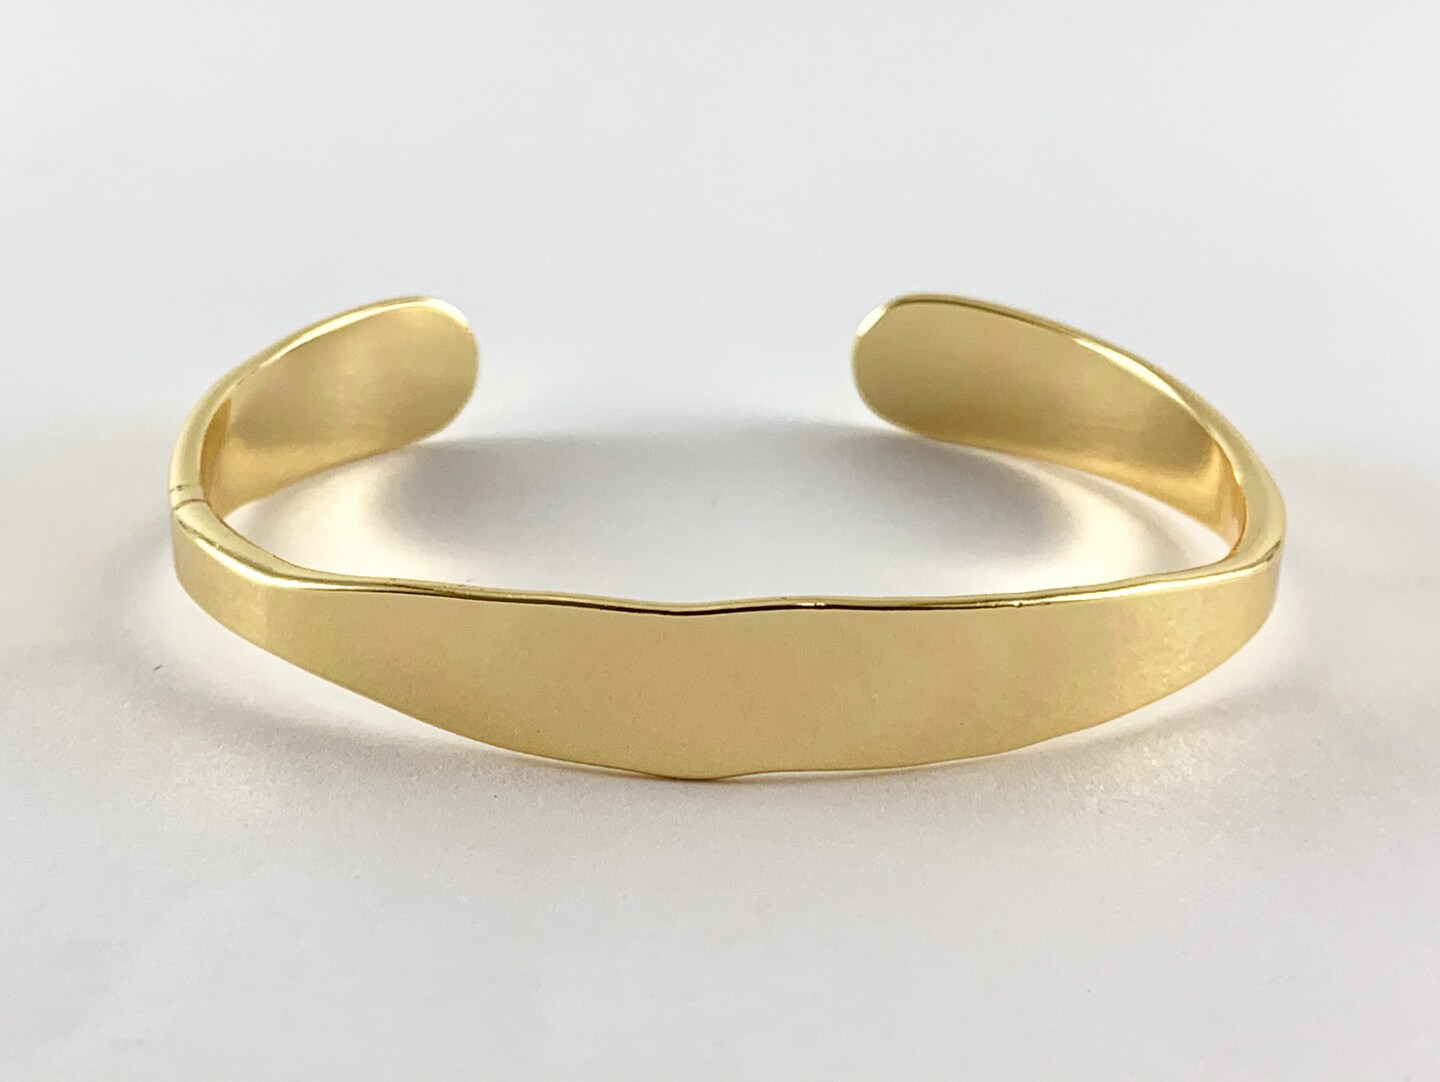 Real Gold 18K Plated Copper Simple Minimalist Adjustable Bracelet Cuff 1 pc